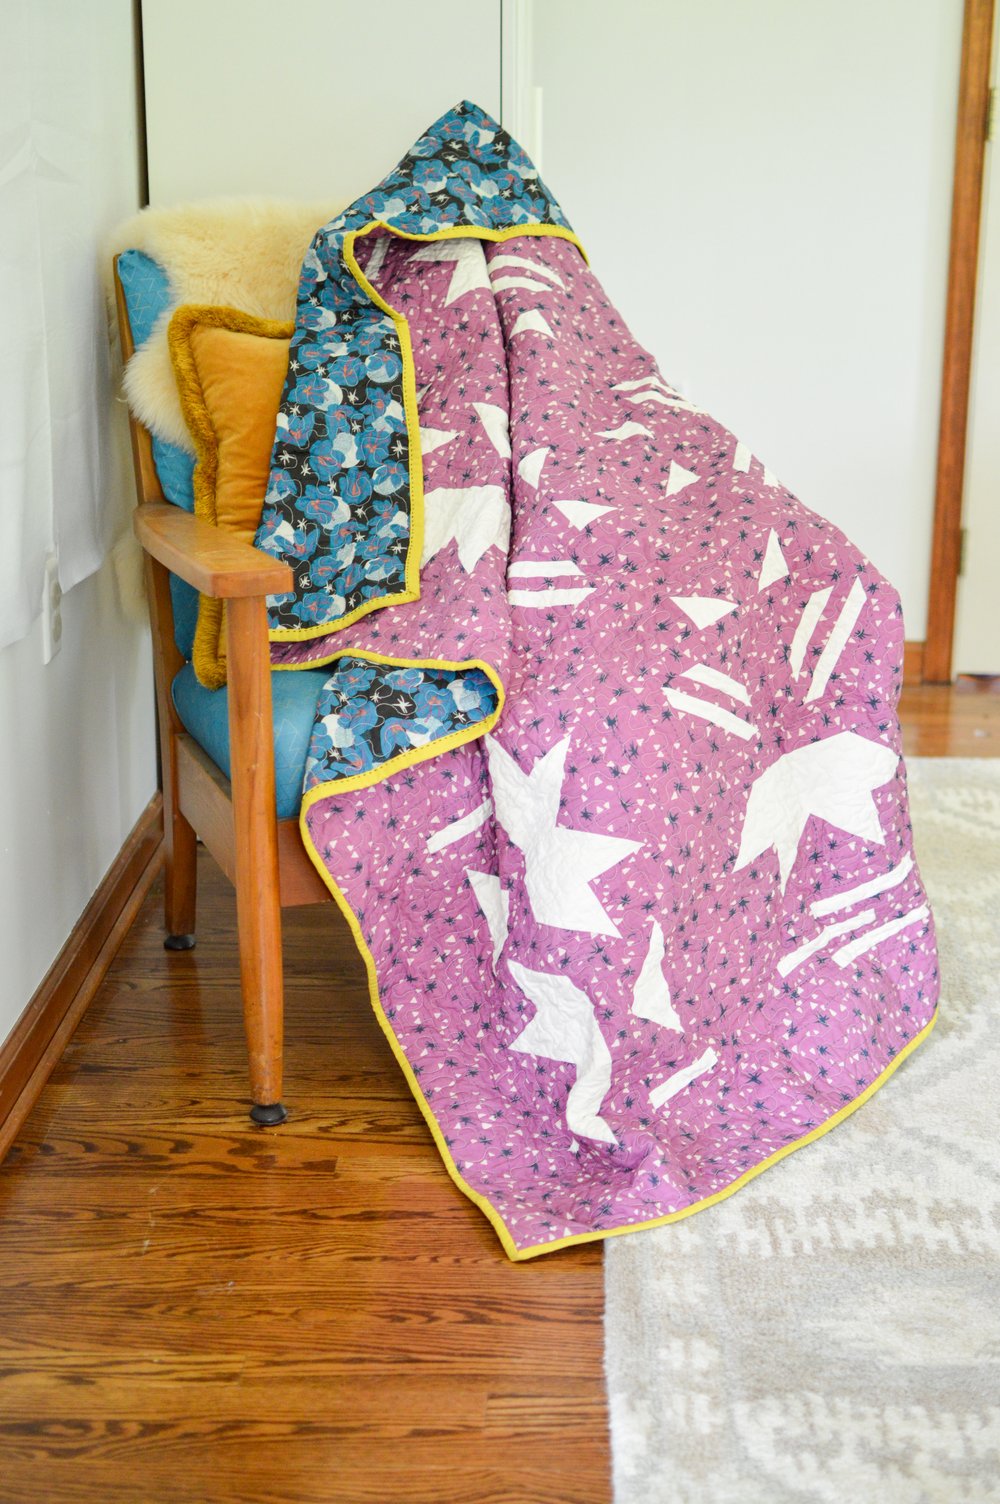 Create a Starry Throw Quilt - Quilting Project for All Skill Levels